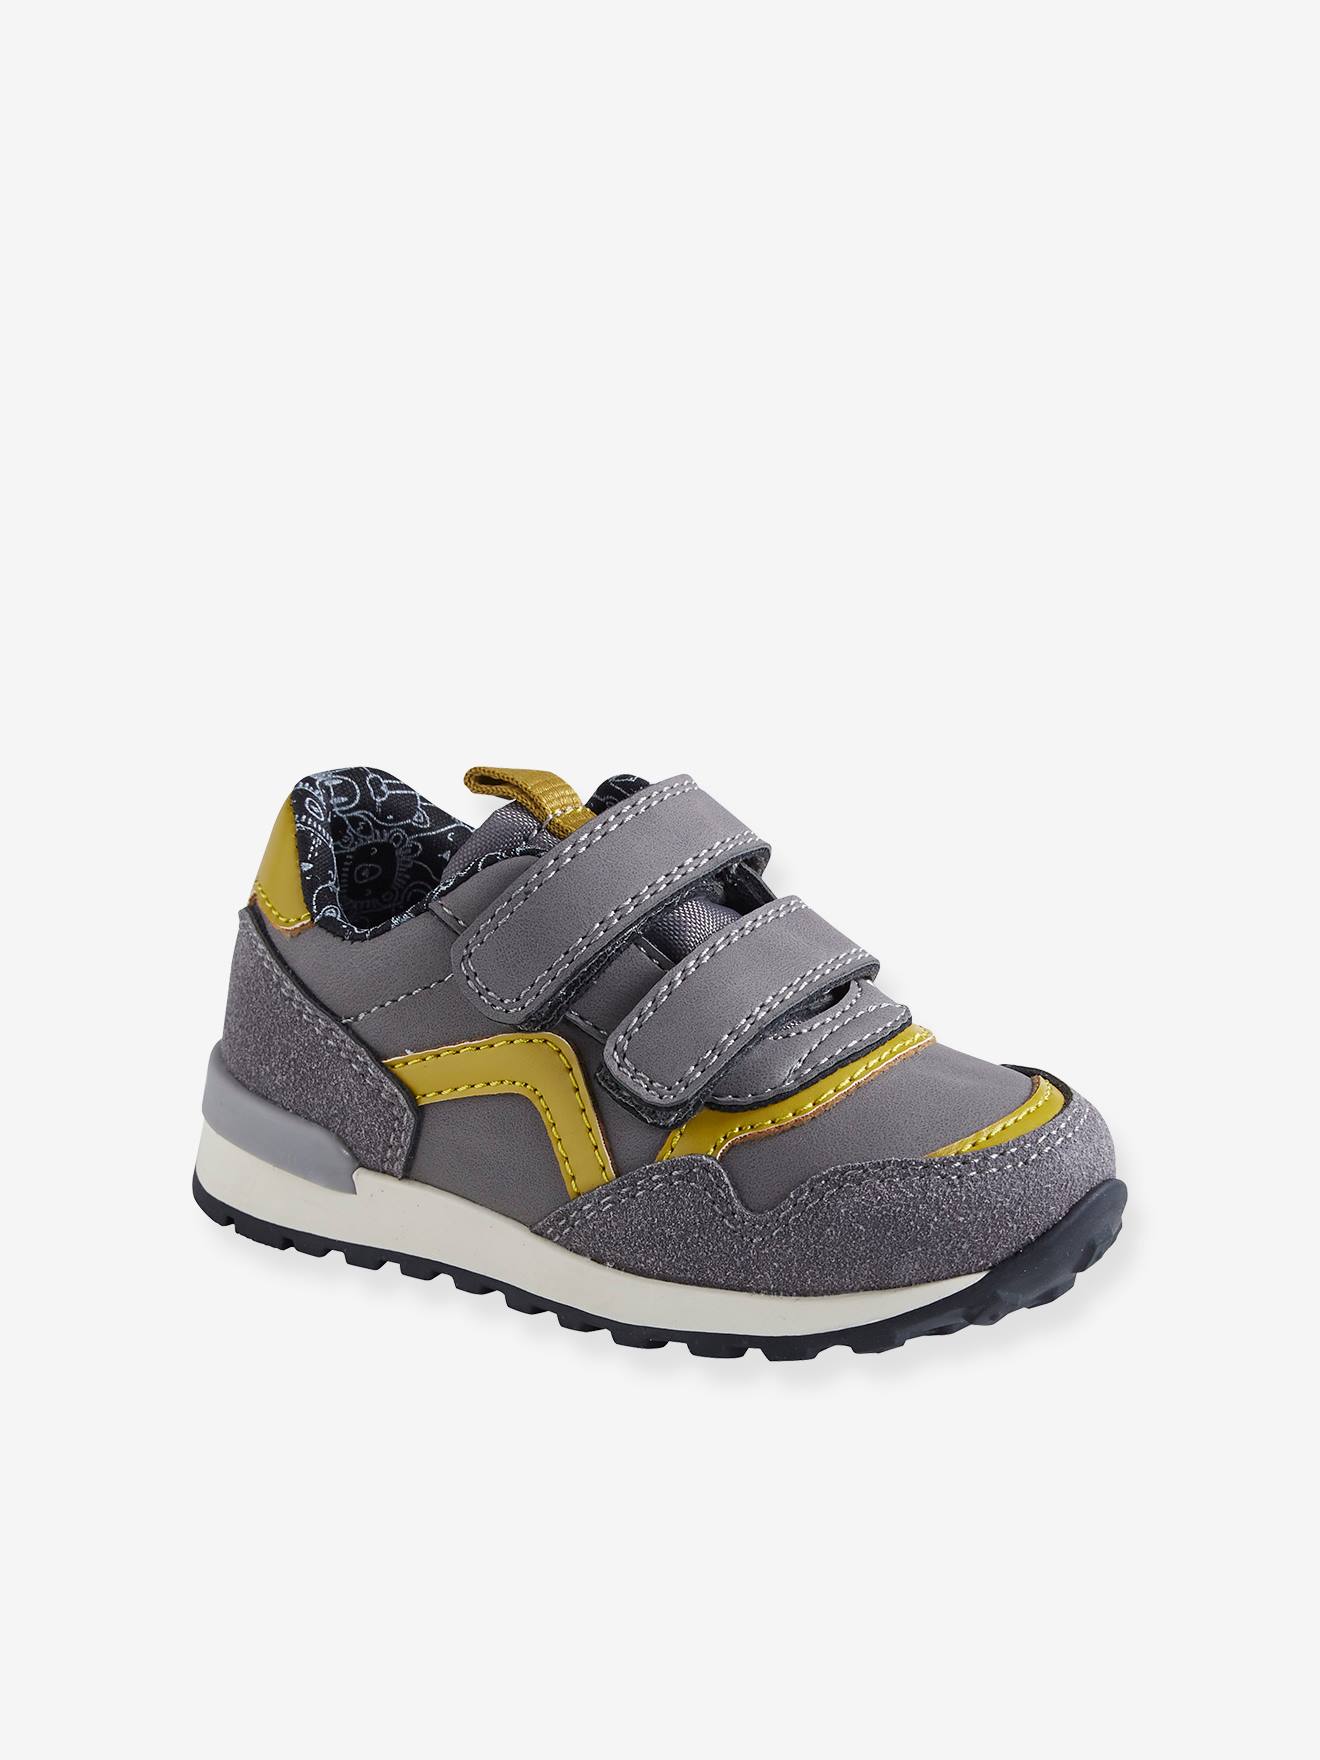 shoes for baby boy online